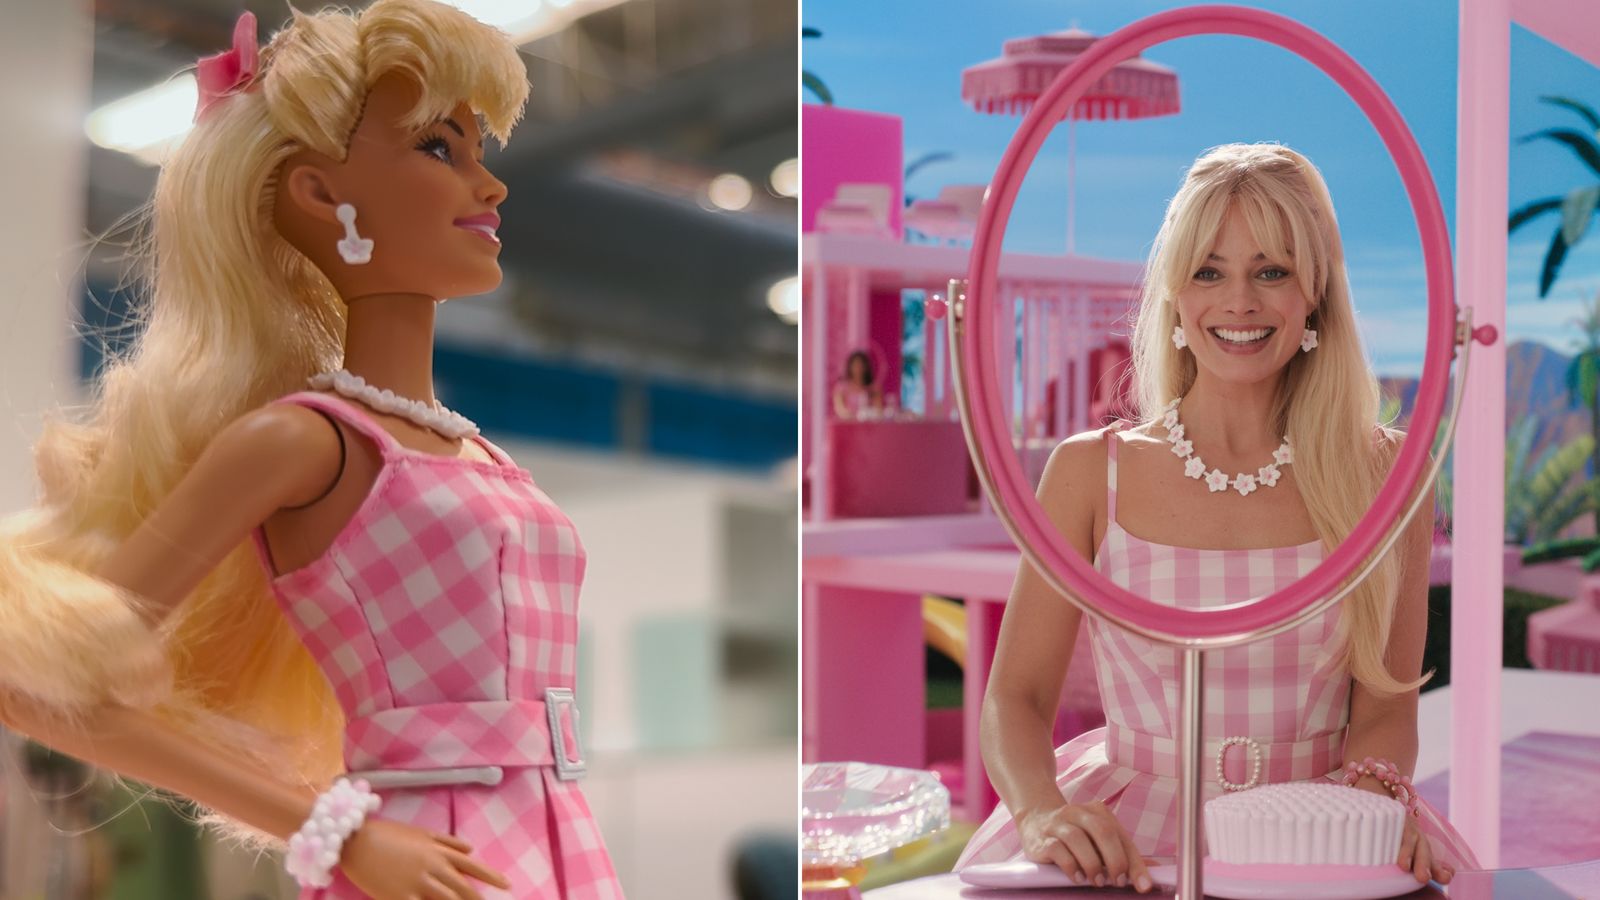 Barbie is now streaming, and then some